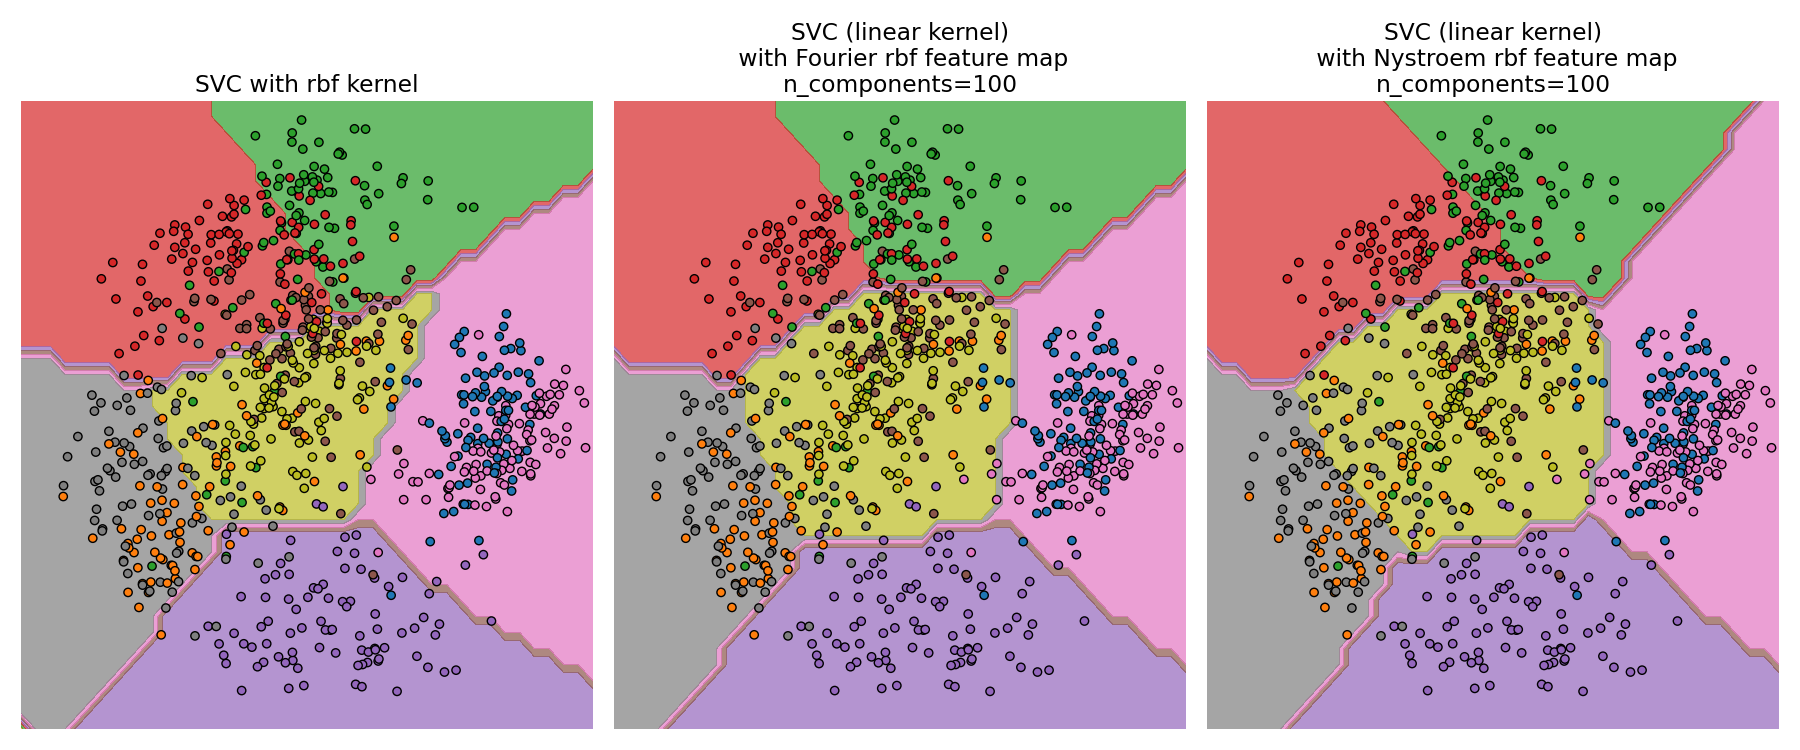 SVC with rbf kernel, SVC (linear kernel)  with Fourier rbf feature map n_components=100, SVC (linear kernel)  with Nystroem rbf feature map n_components=100